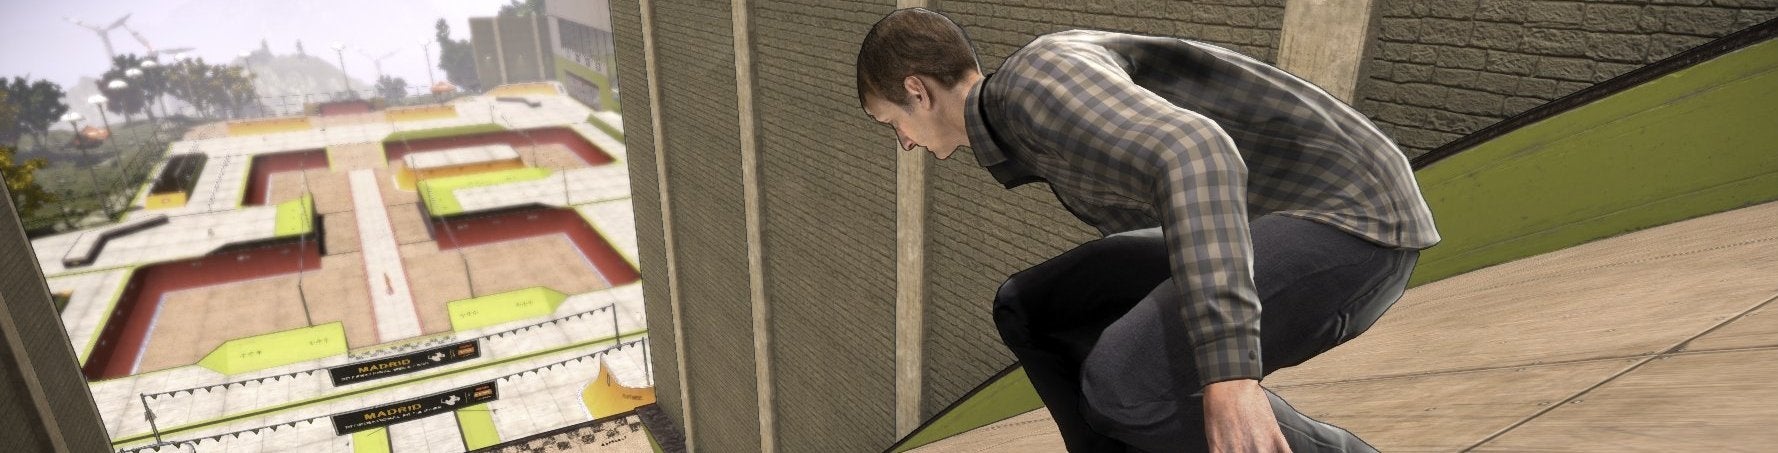 Image for Tony Hawks Pro Skater 5 review